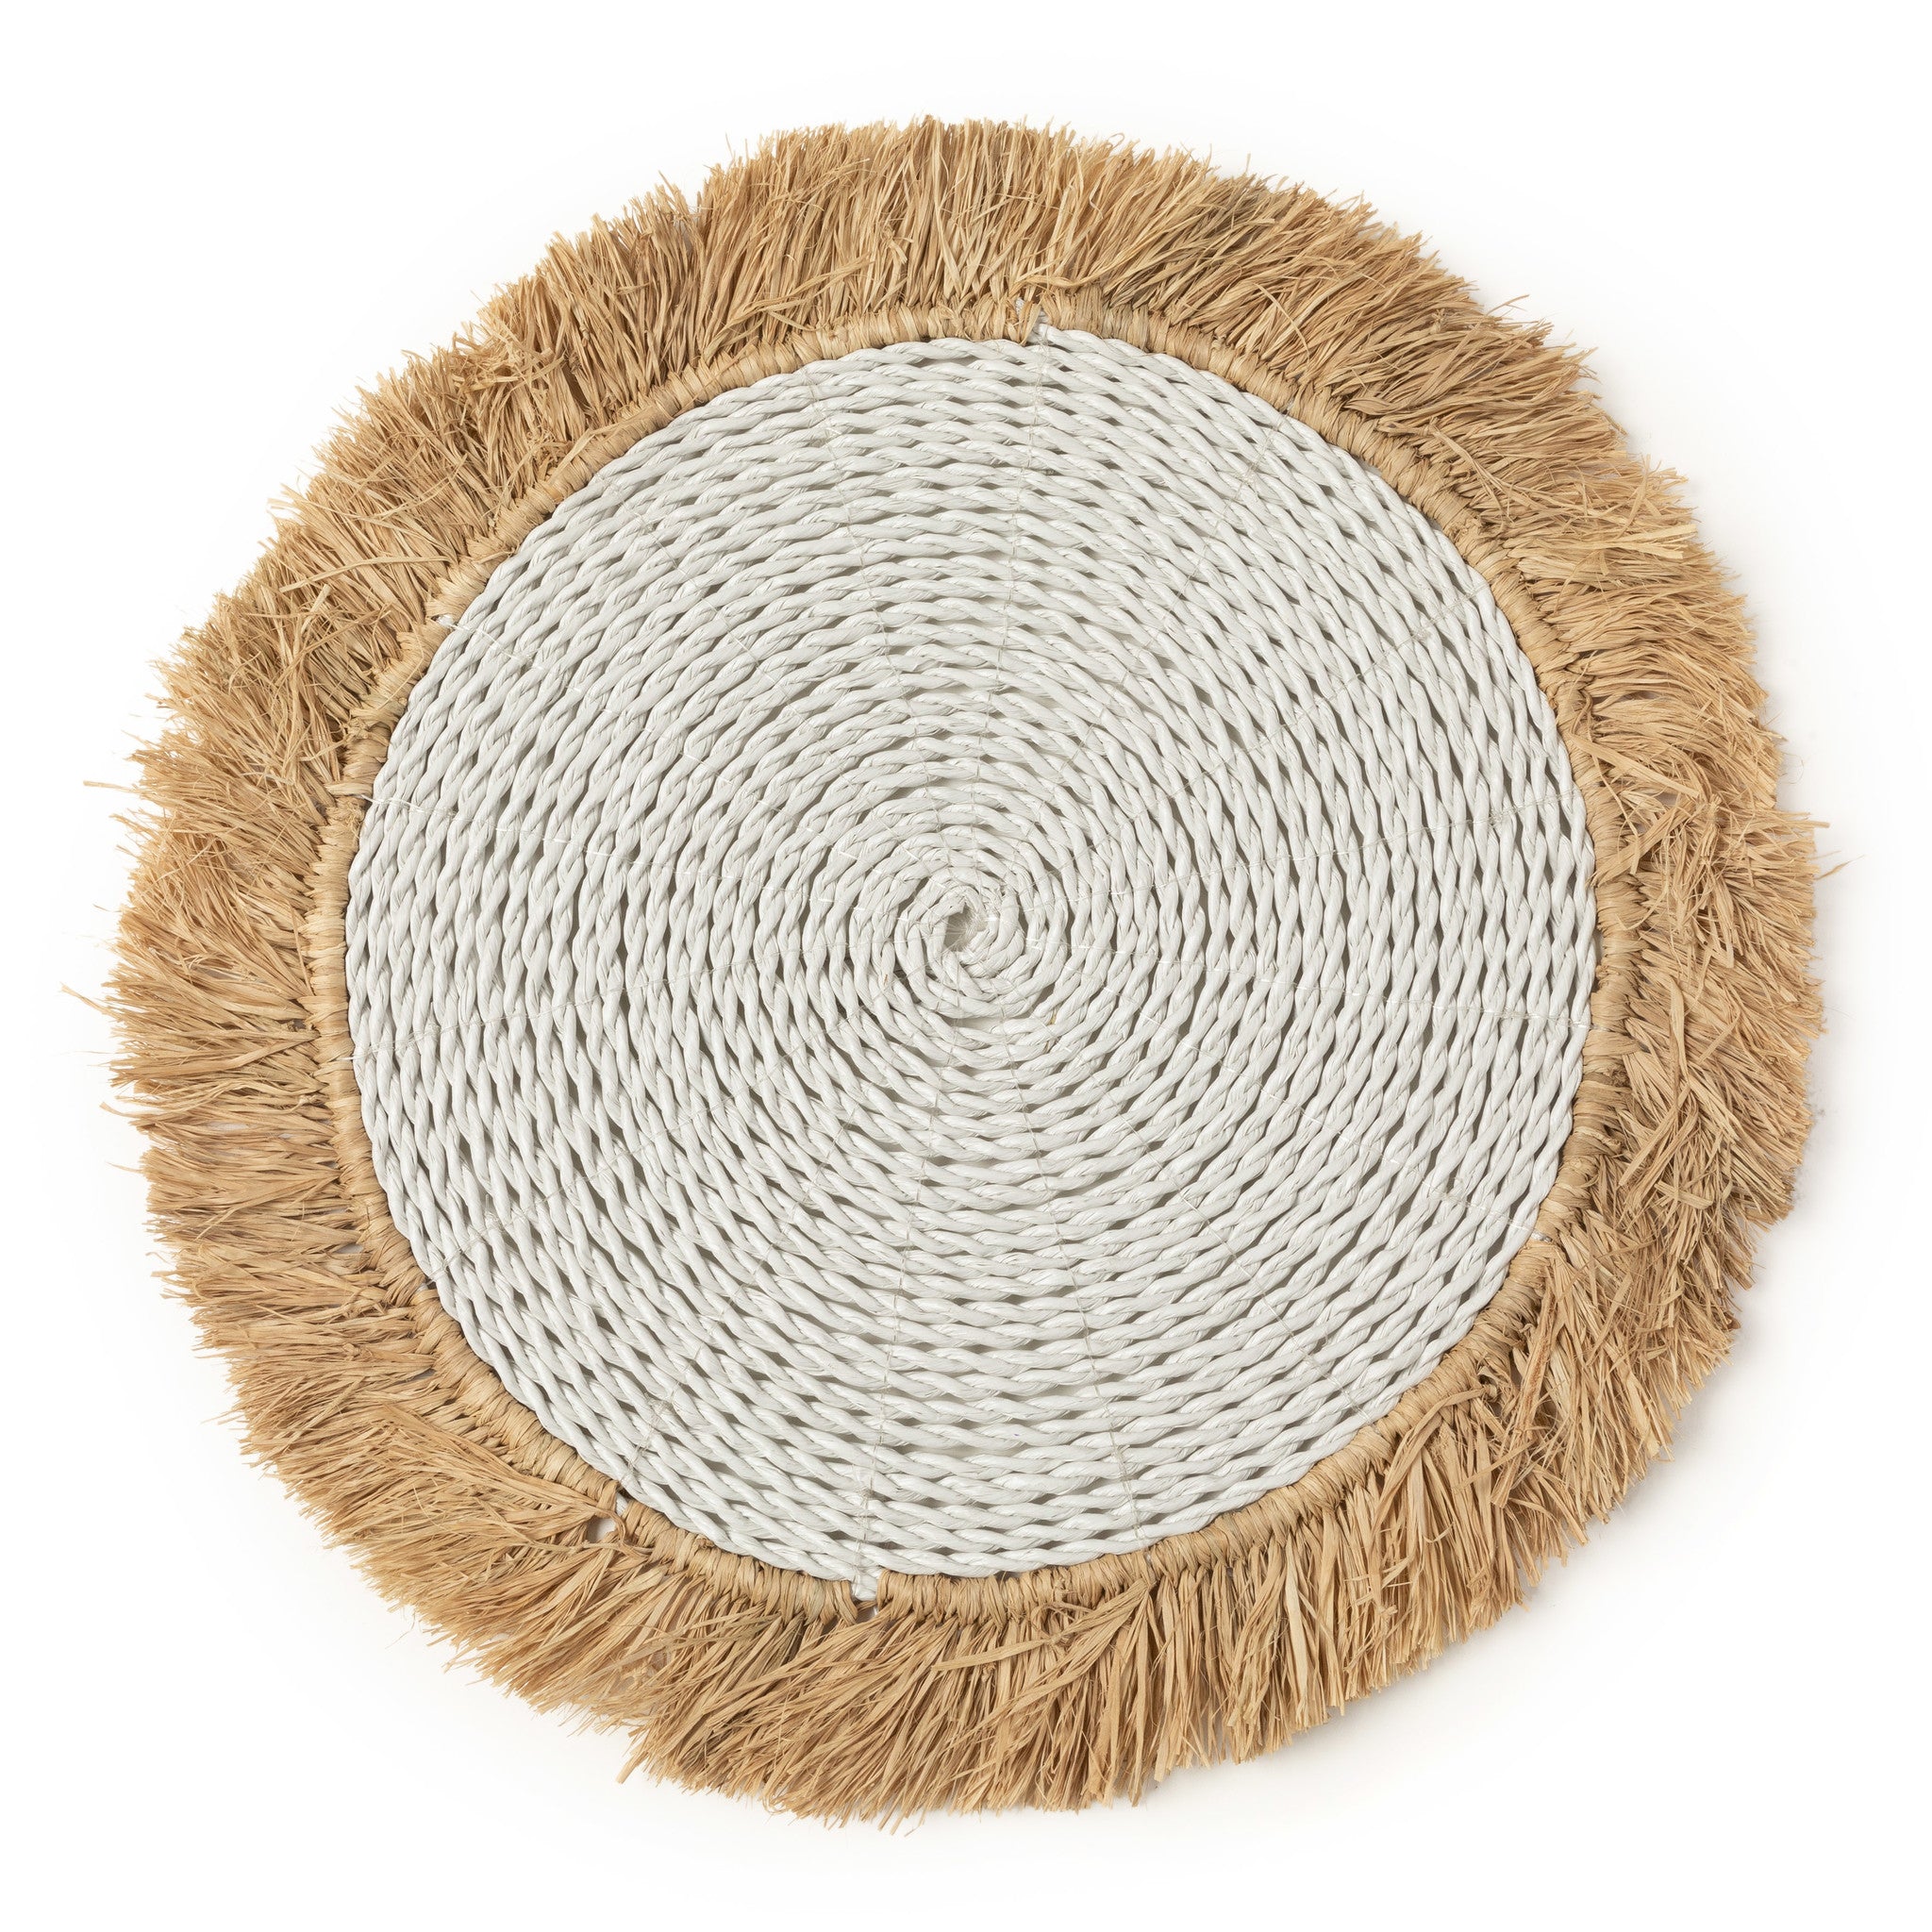 THE SEAGRASS RAFFIA Placemat White-Natural front view